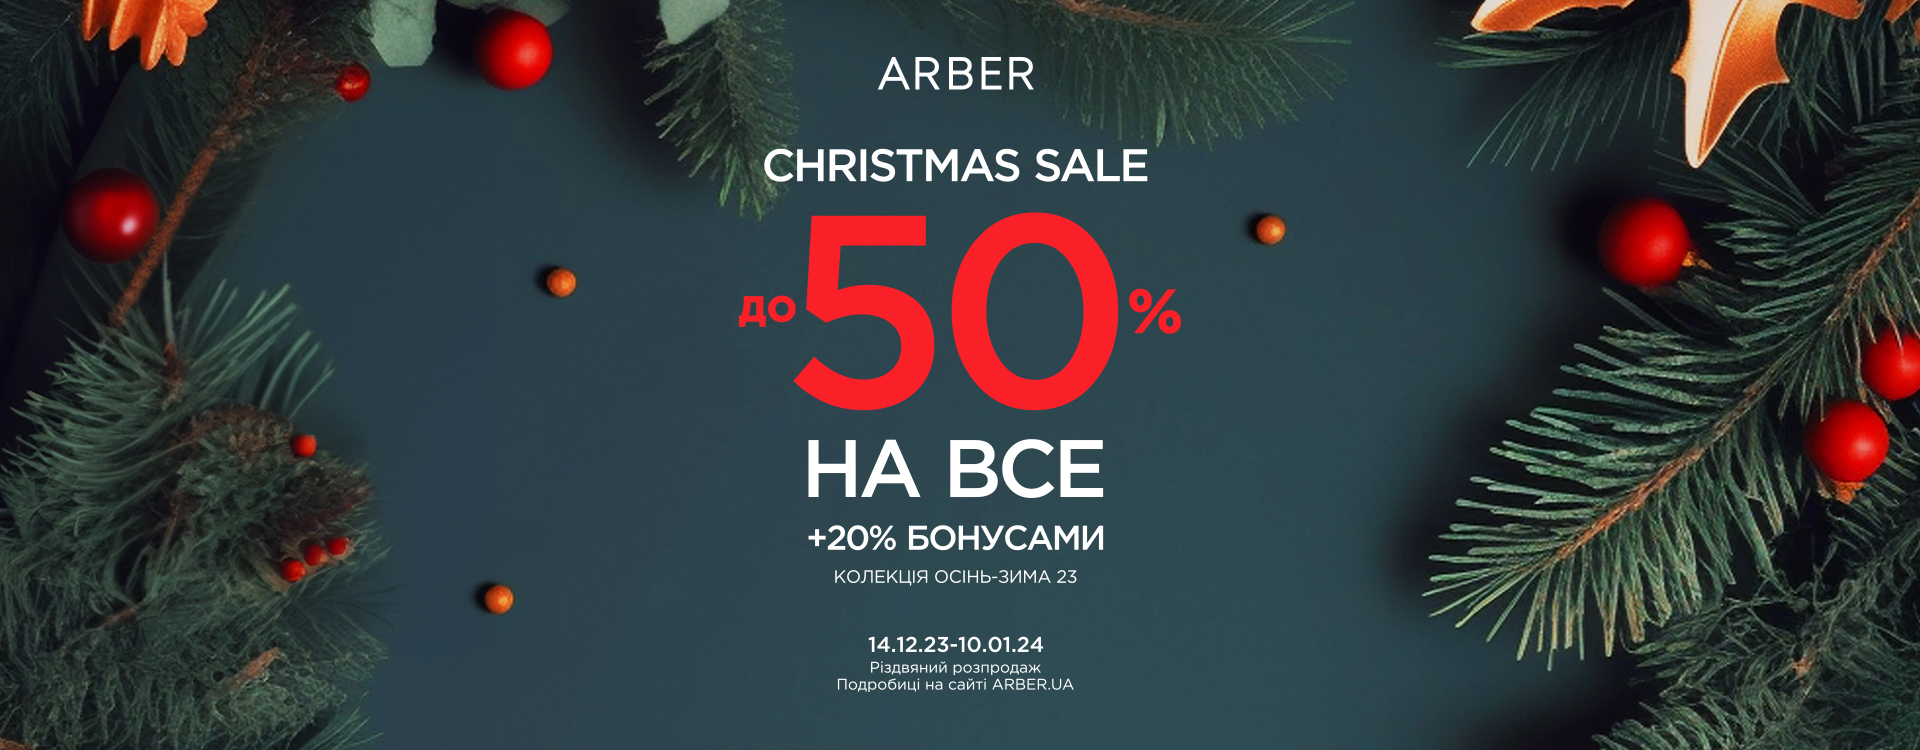 ARBER Christmas Sale up to -50%